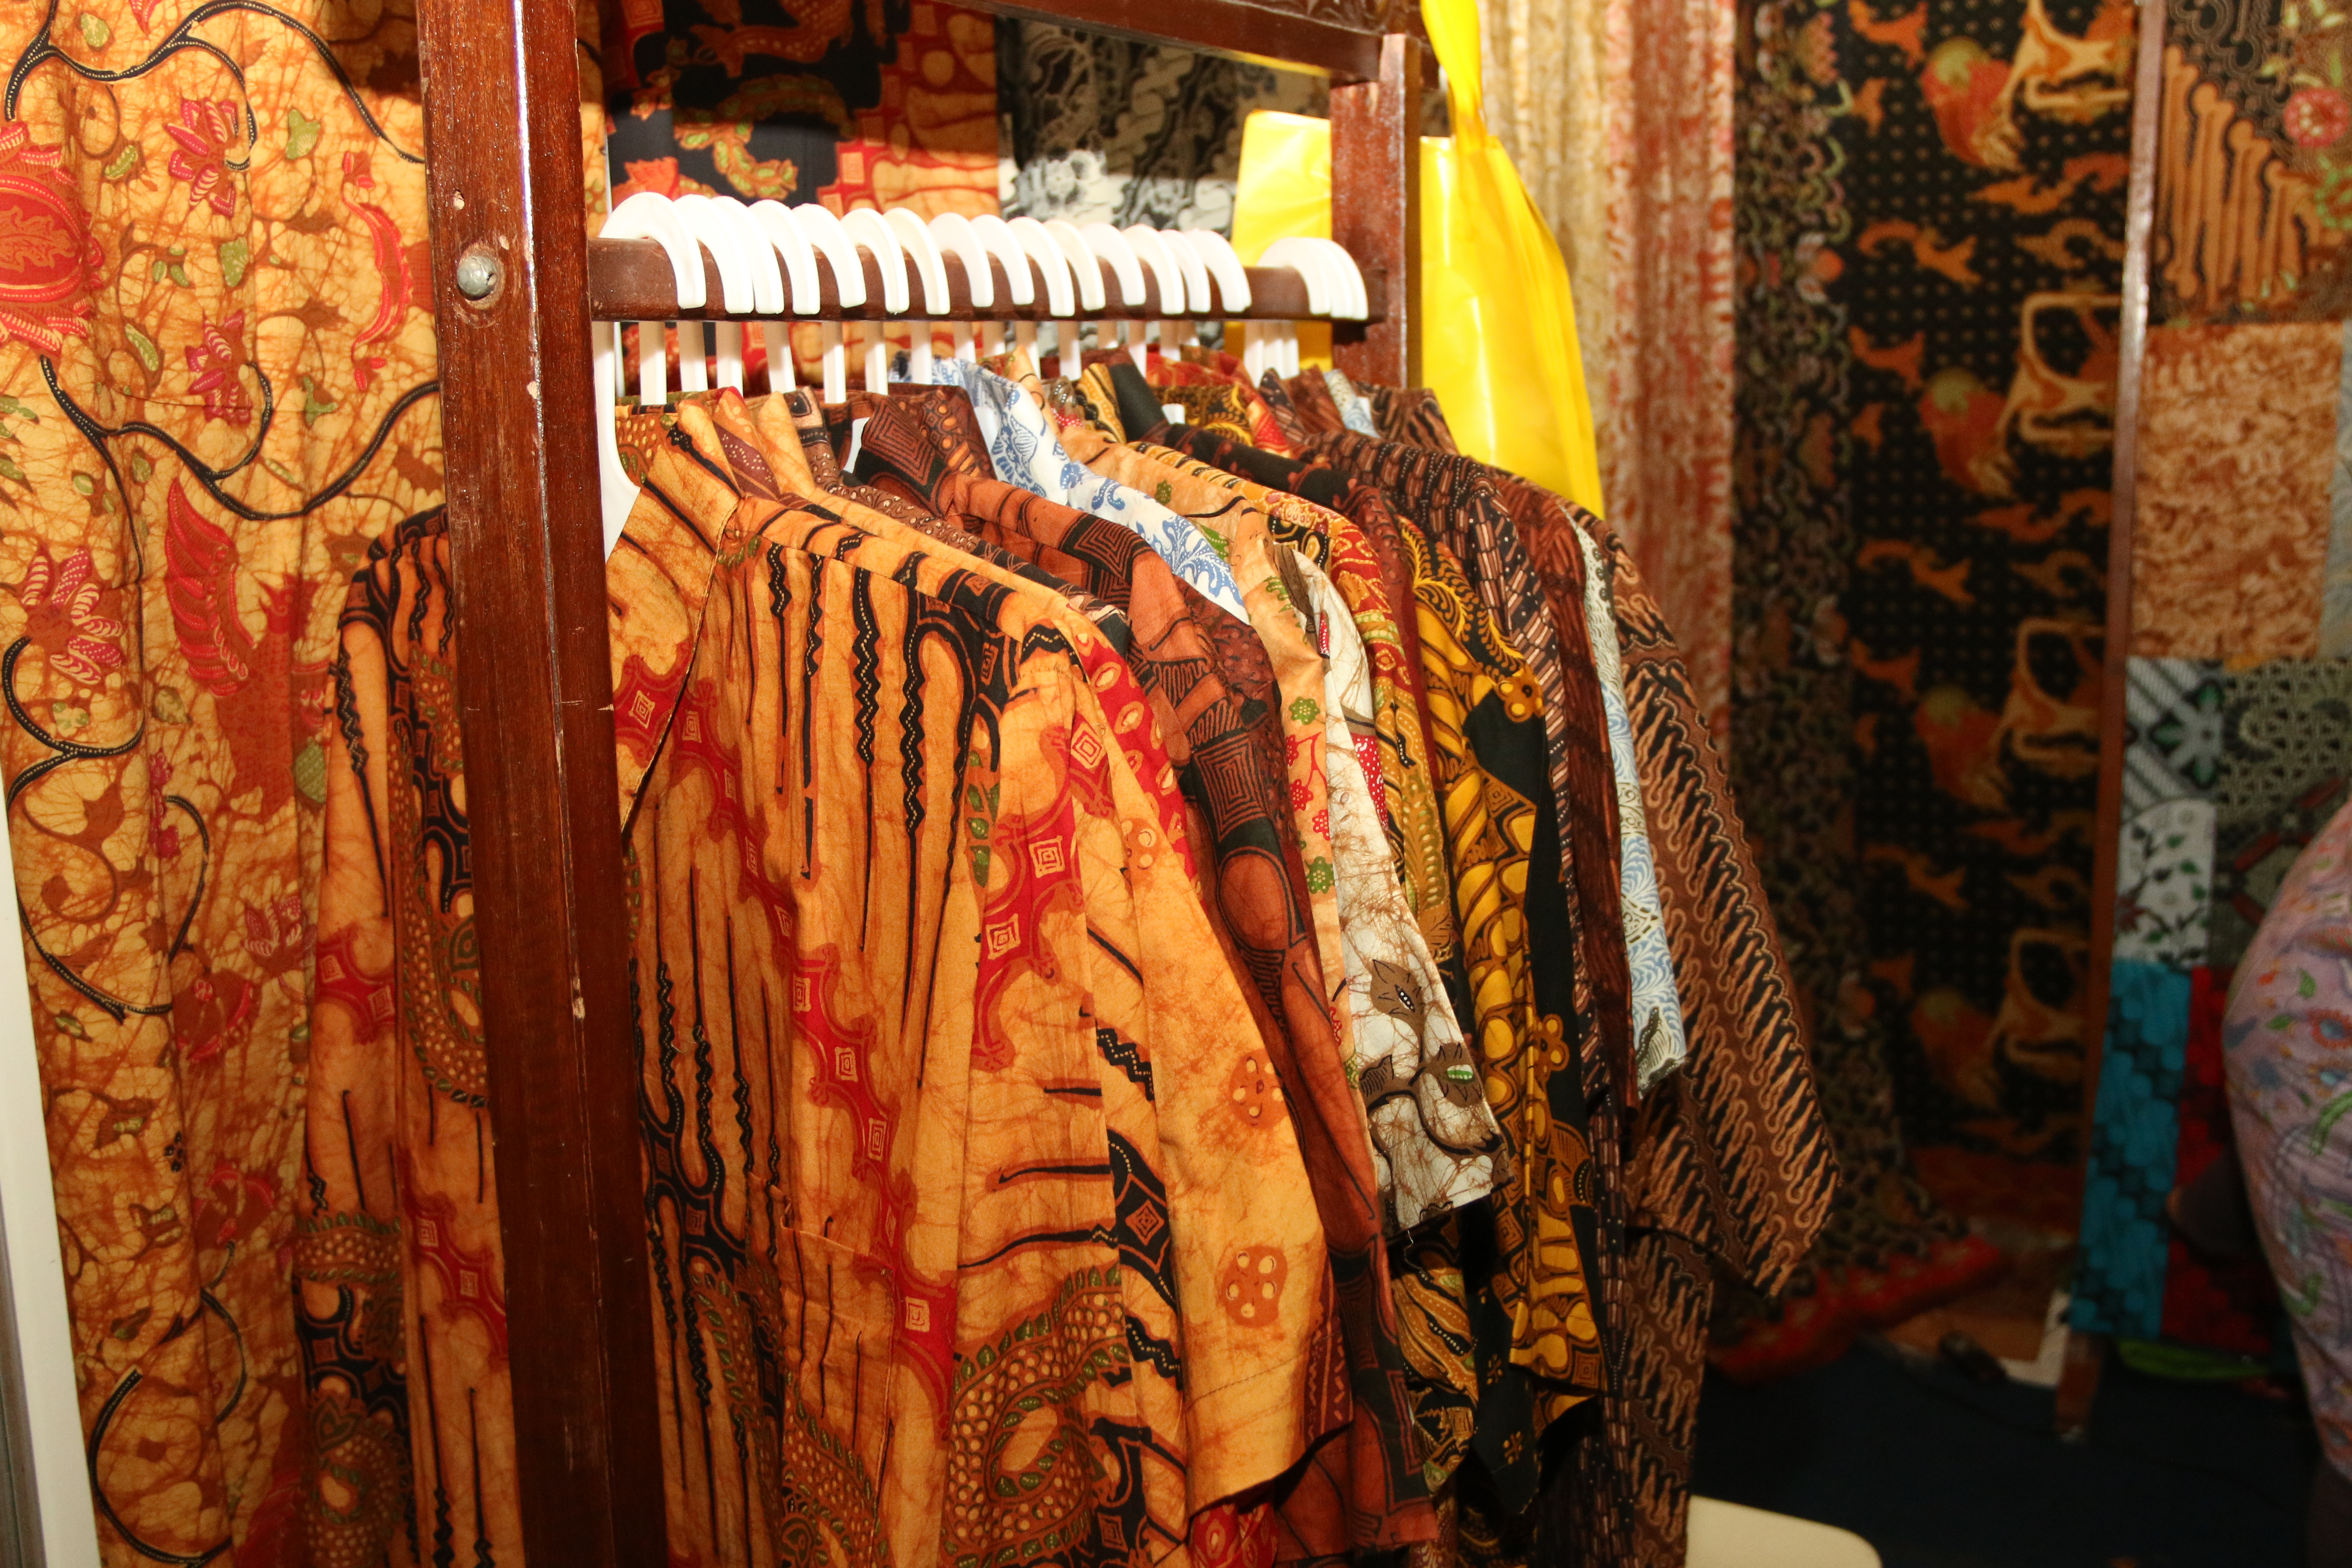 Sragen is the biggest batik production centers after Pekalongan and Solo